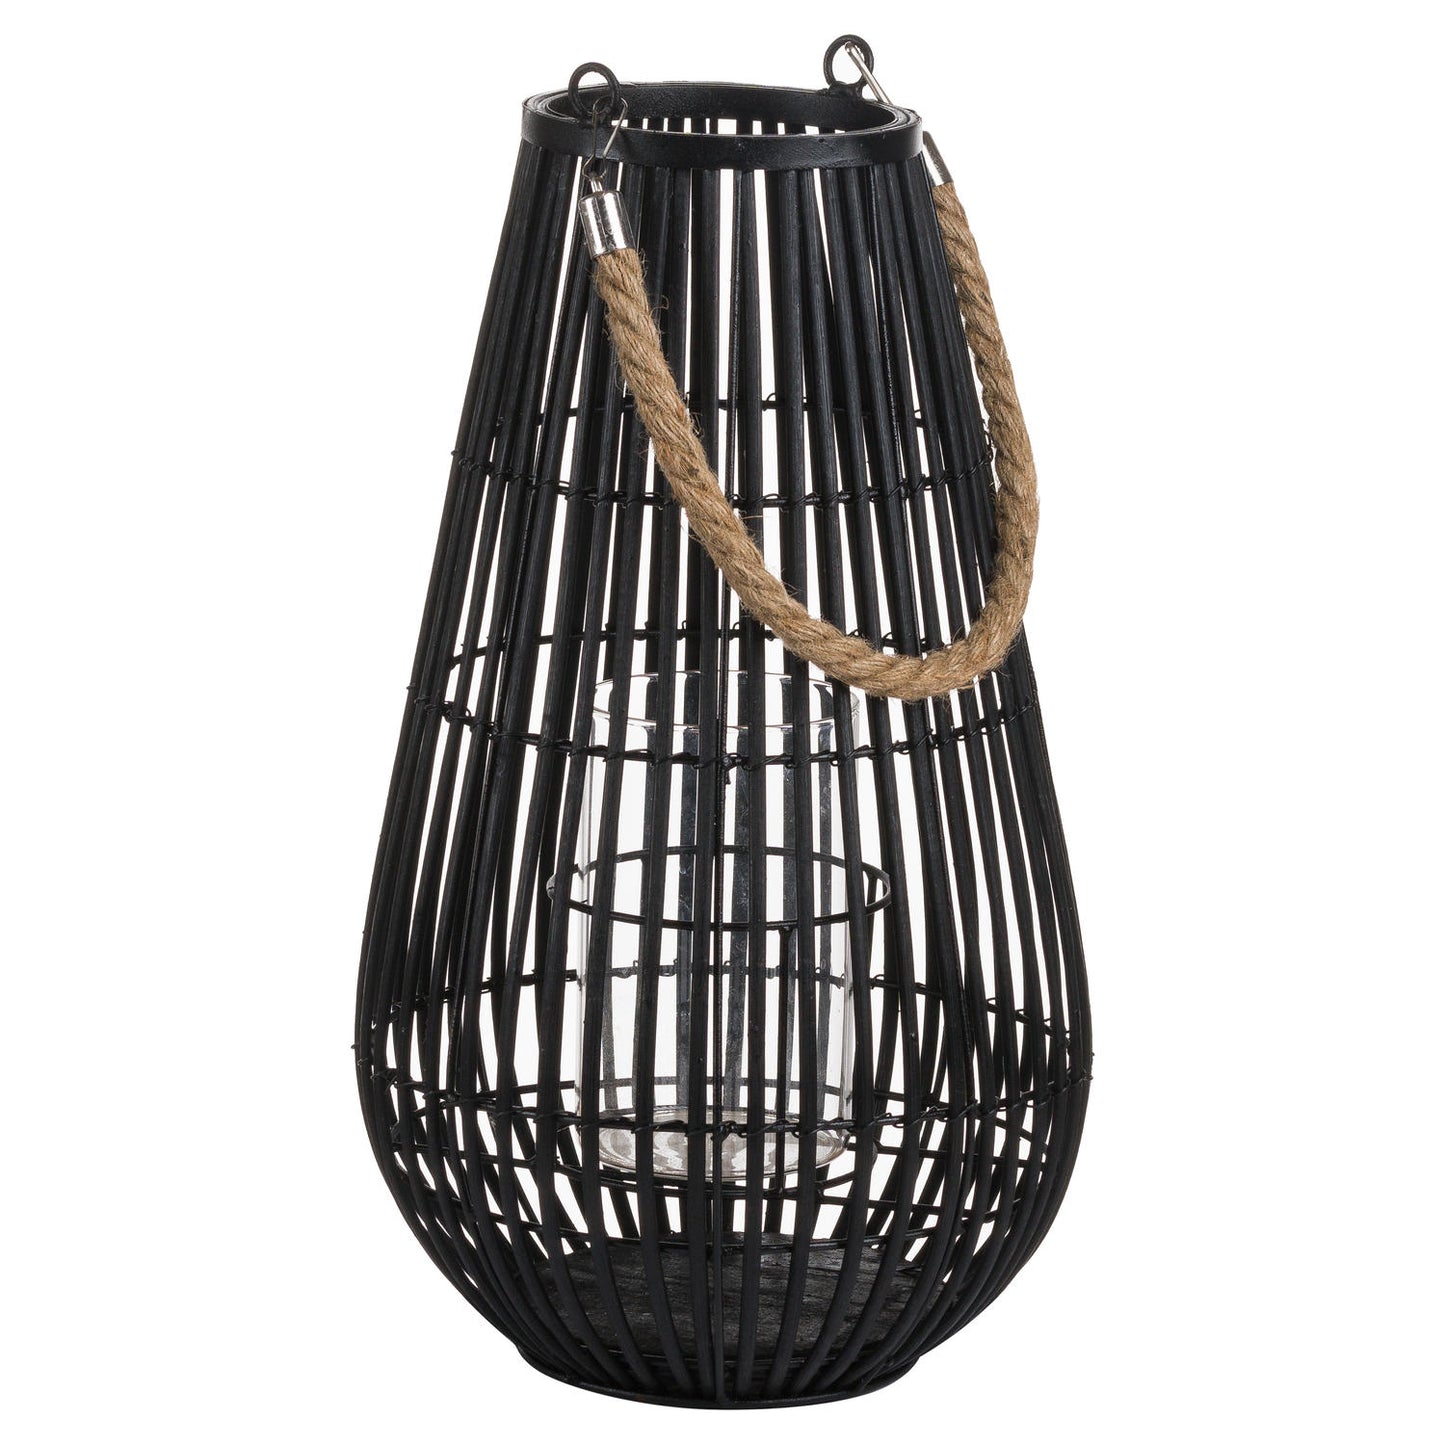 Domed Rattan Lantern With Rope Detail